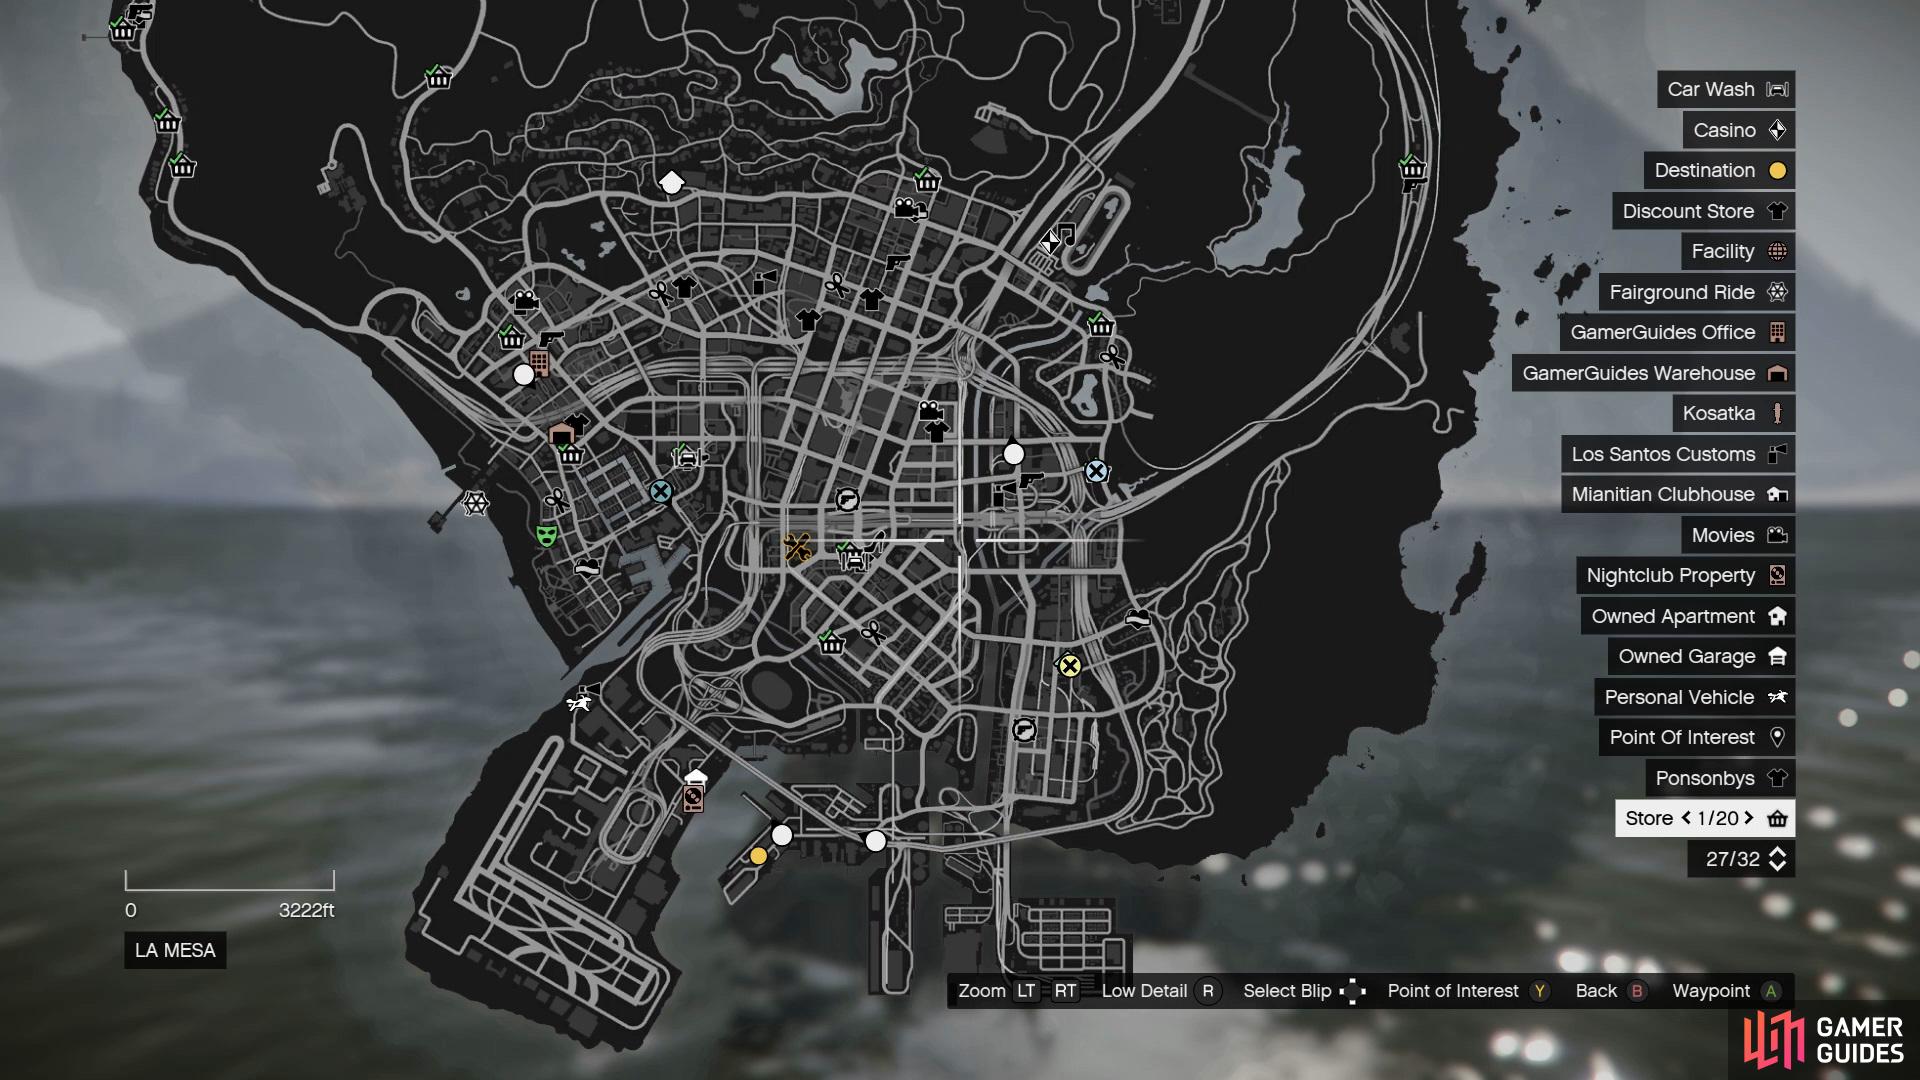 Head to Elysian Island which is at the bottom of the map